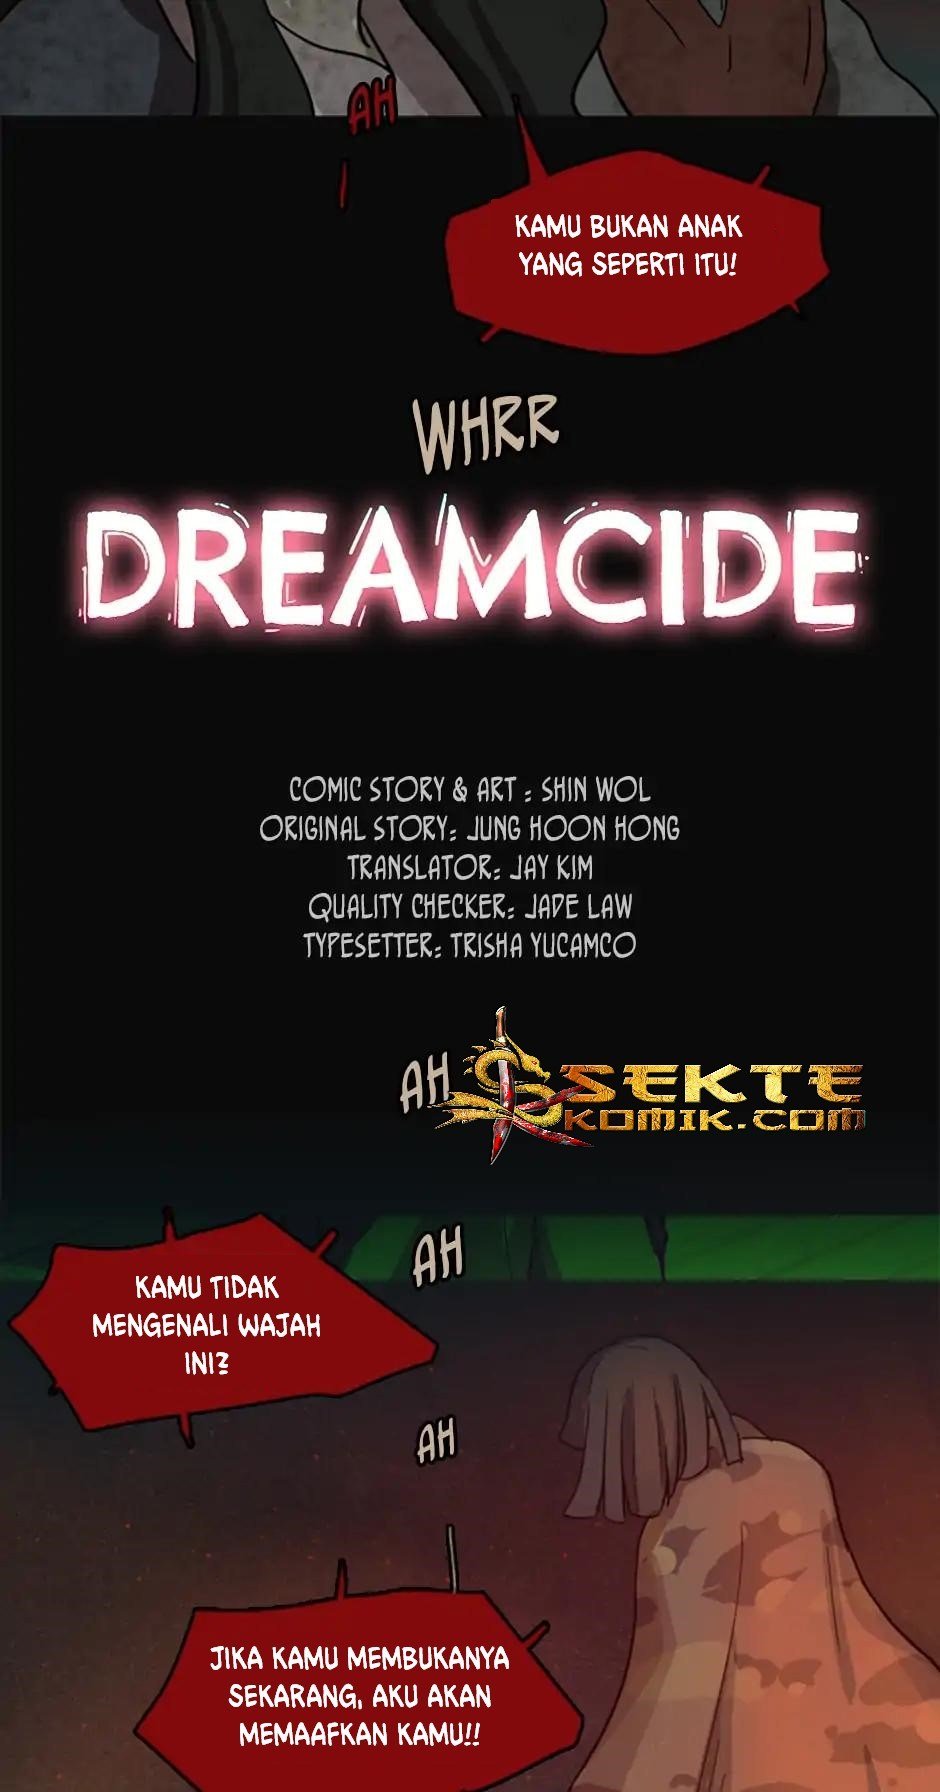 Dreamside Chapter 05